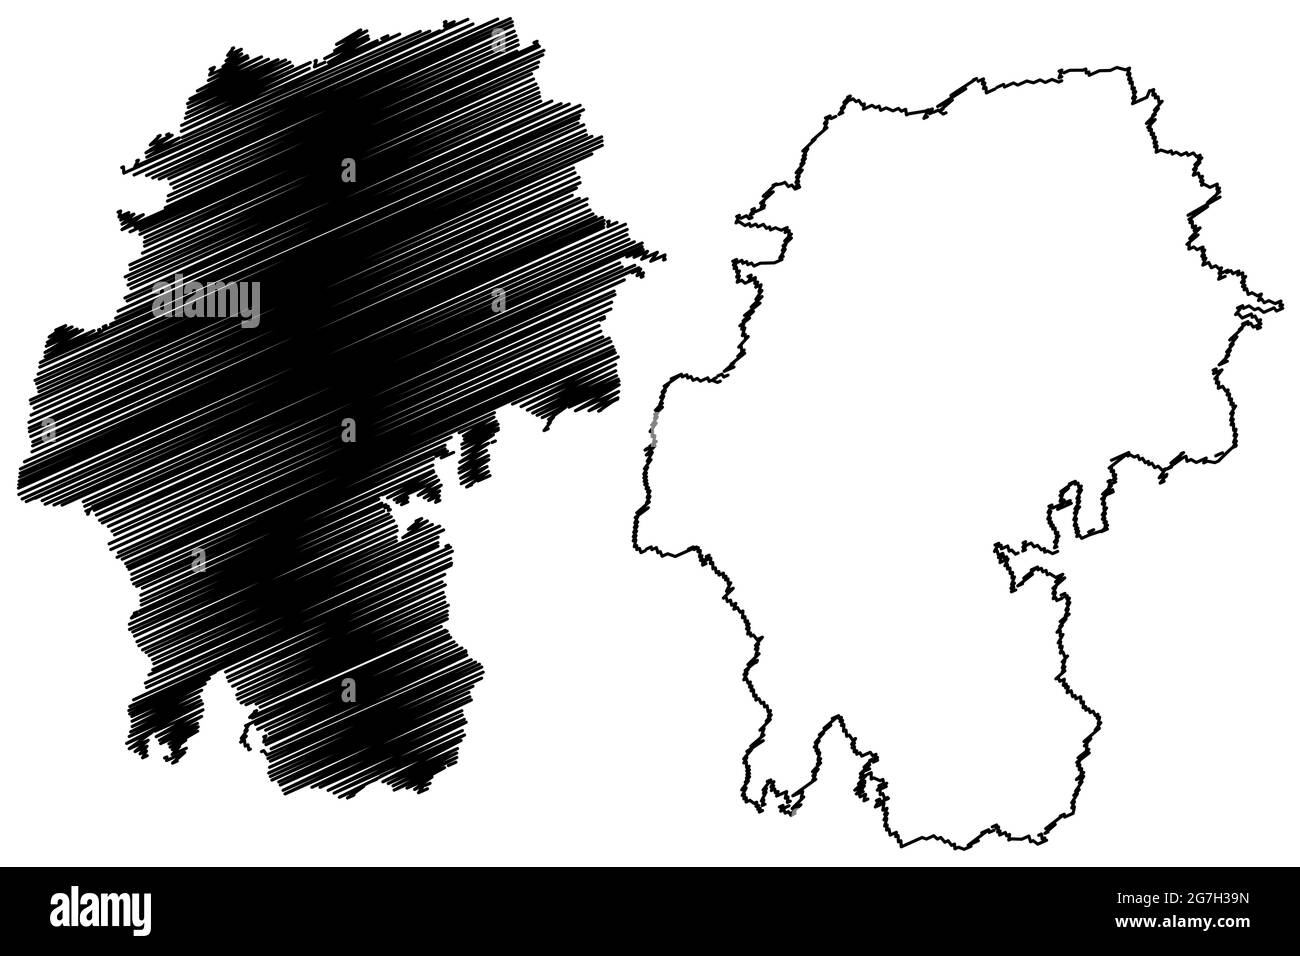 Ilm-Kreis district (Federal Republic of Germany, rural district, Free State of Thuringia) map vector illustration, scribble sketch Ilm Kreis map Stock Vector